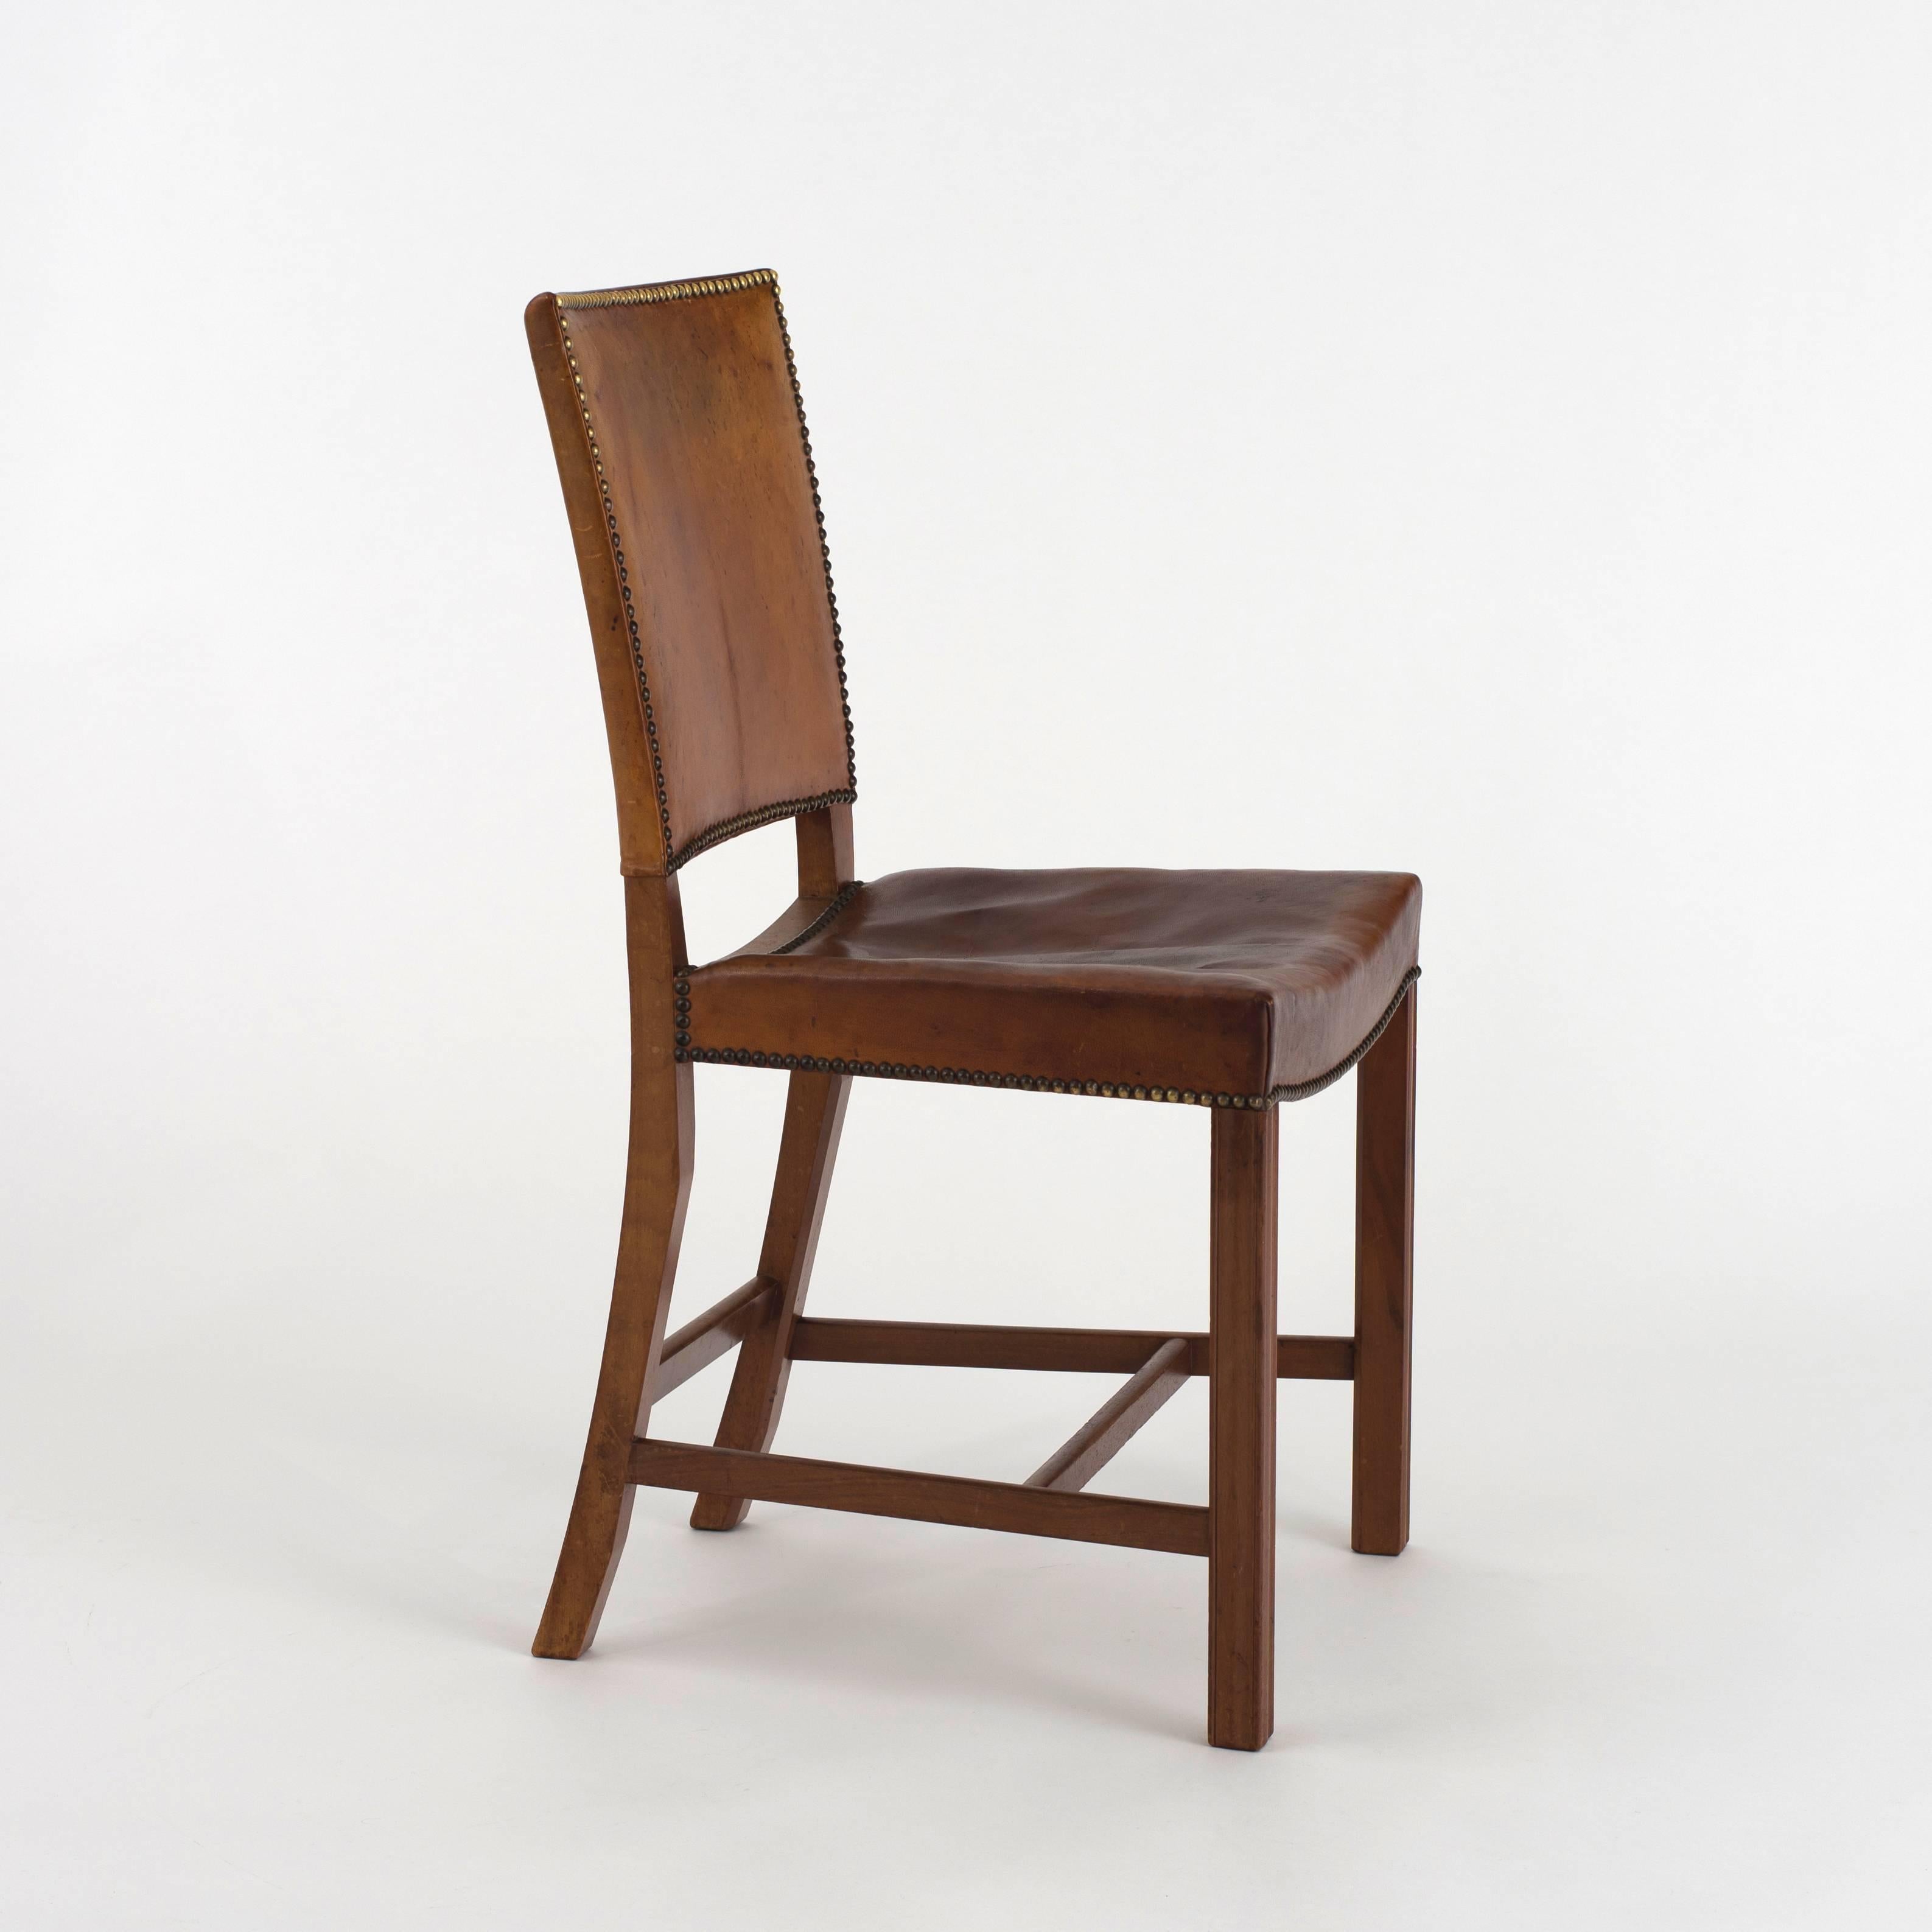 'Red Chair' in cuban mahogany, Niger leather and brass nails. 

Executed by Rud. Rasmussen 1927 - 1929.